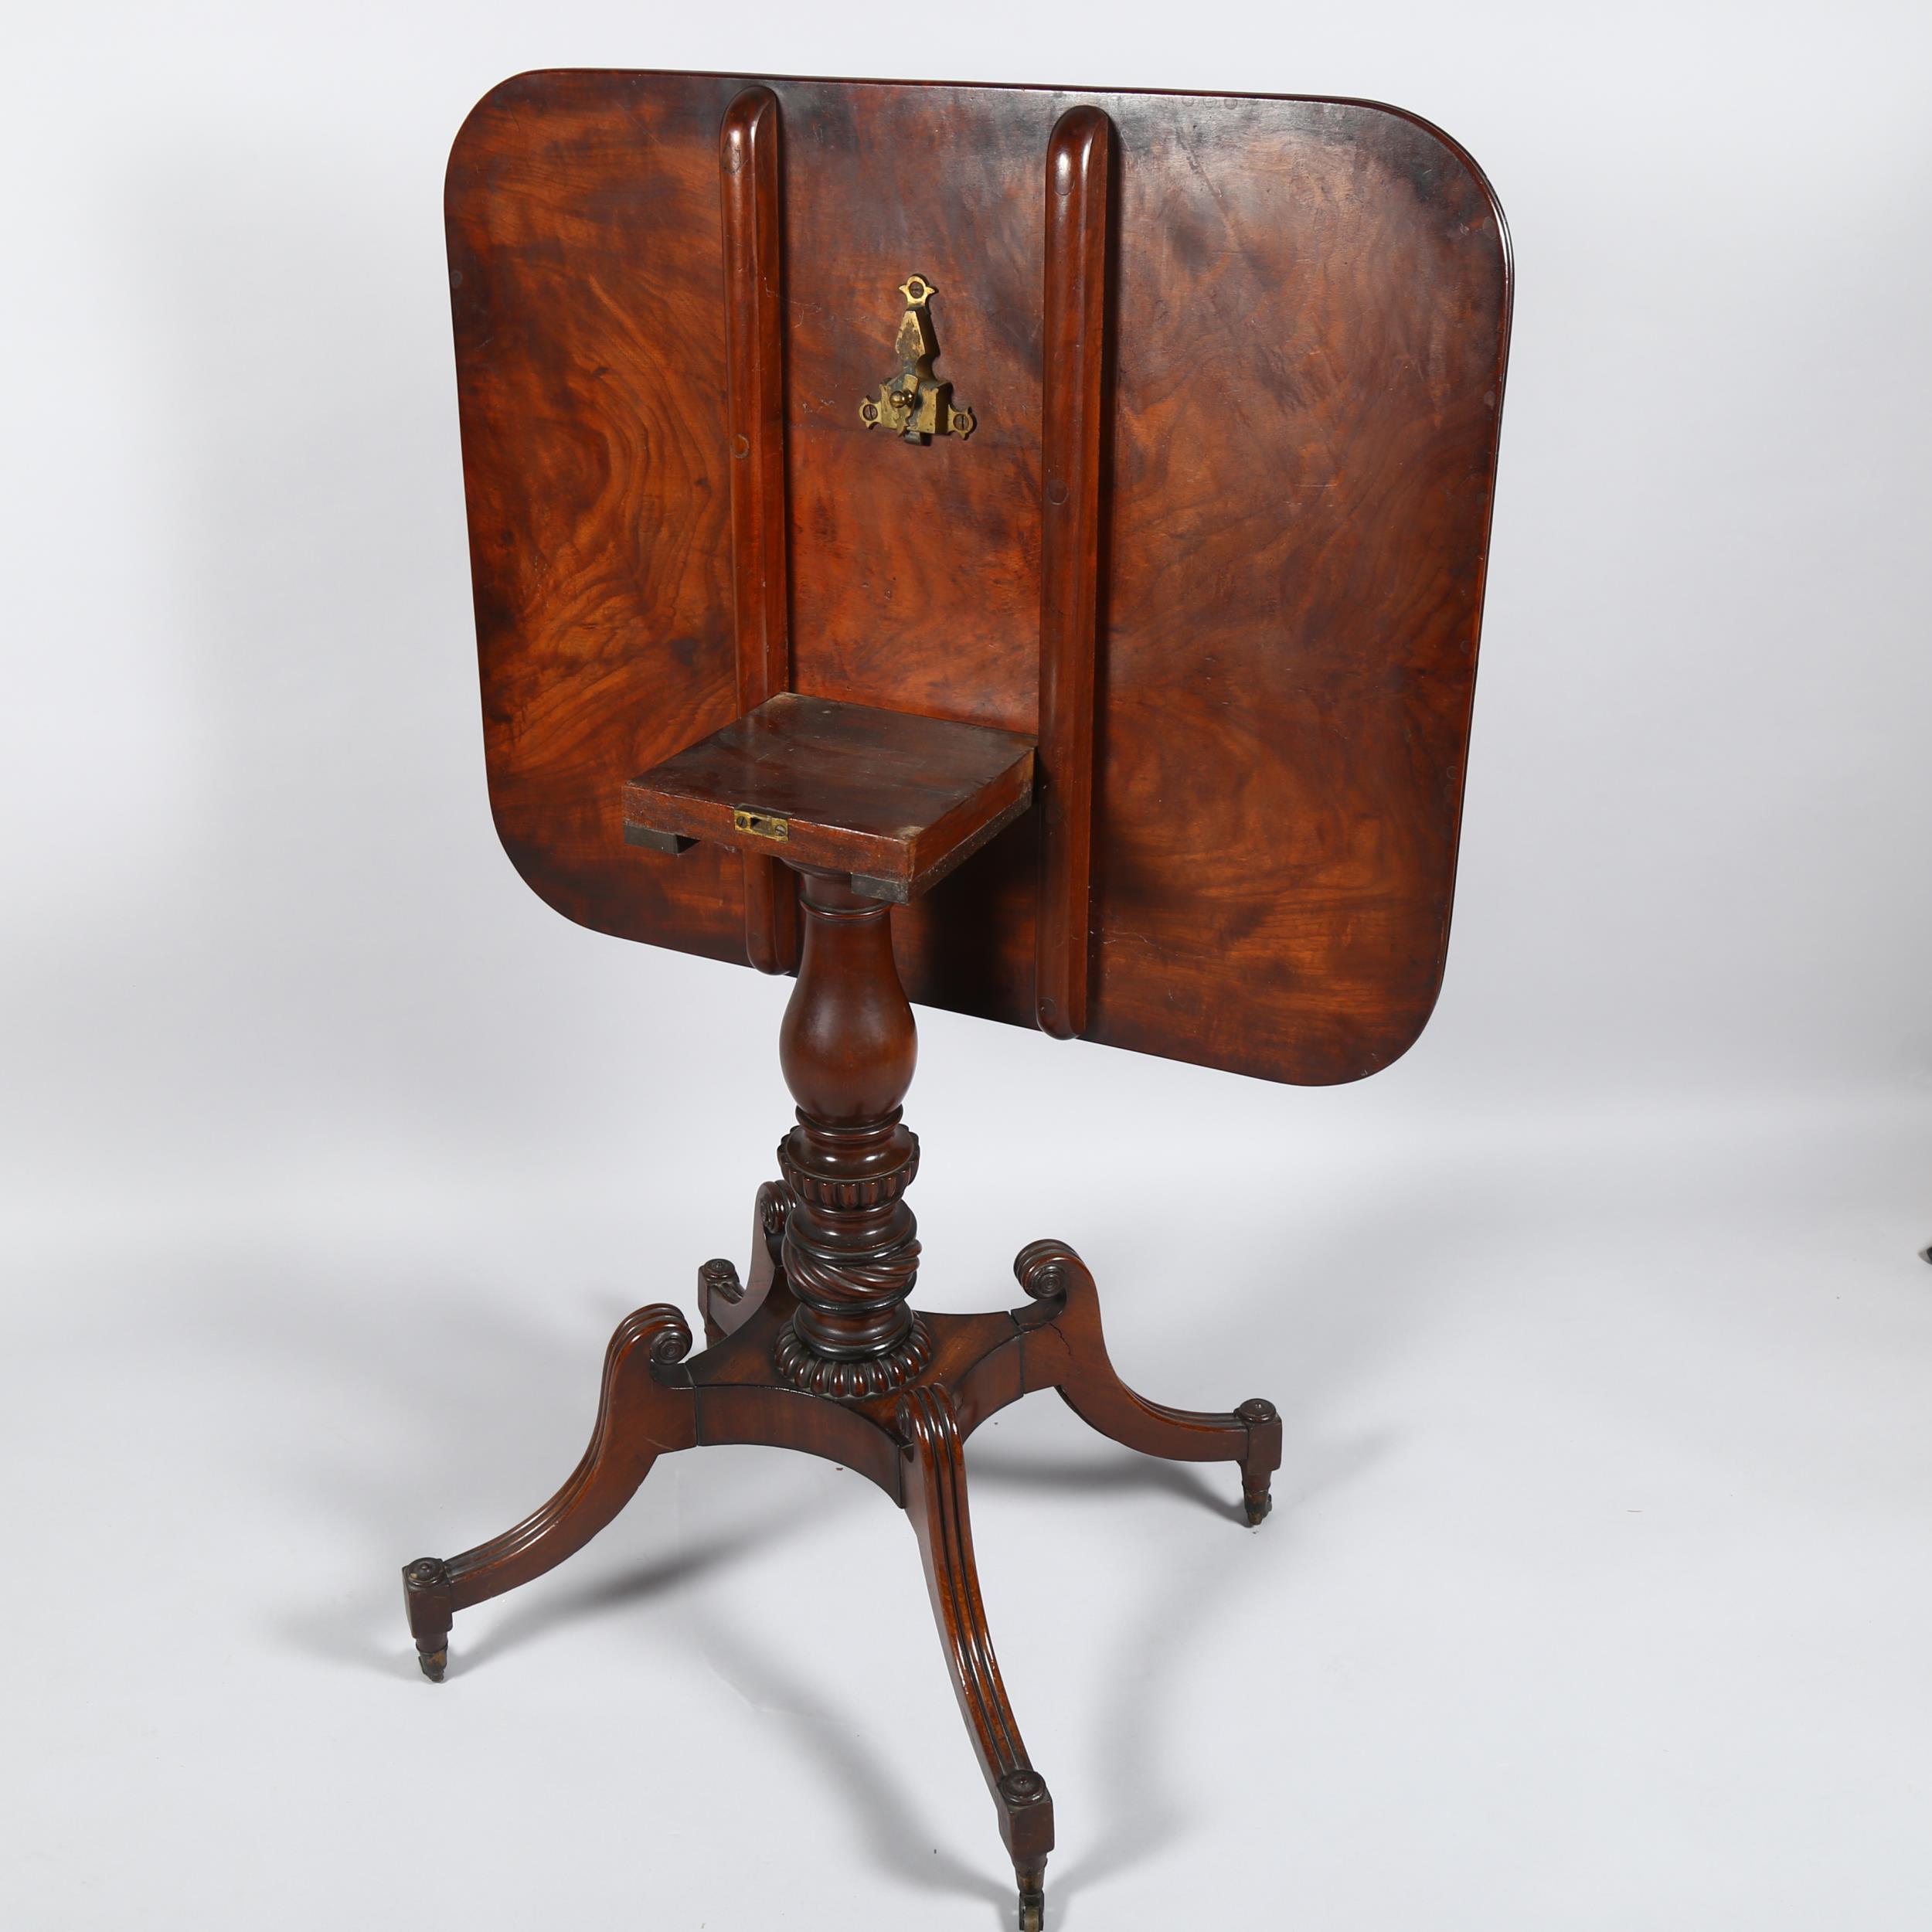 A Regency square mahogany tilt-top table, on carved quadruple base with brass casters, 74cm x 63cm - Image 4 of 5